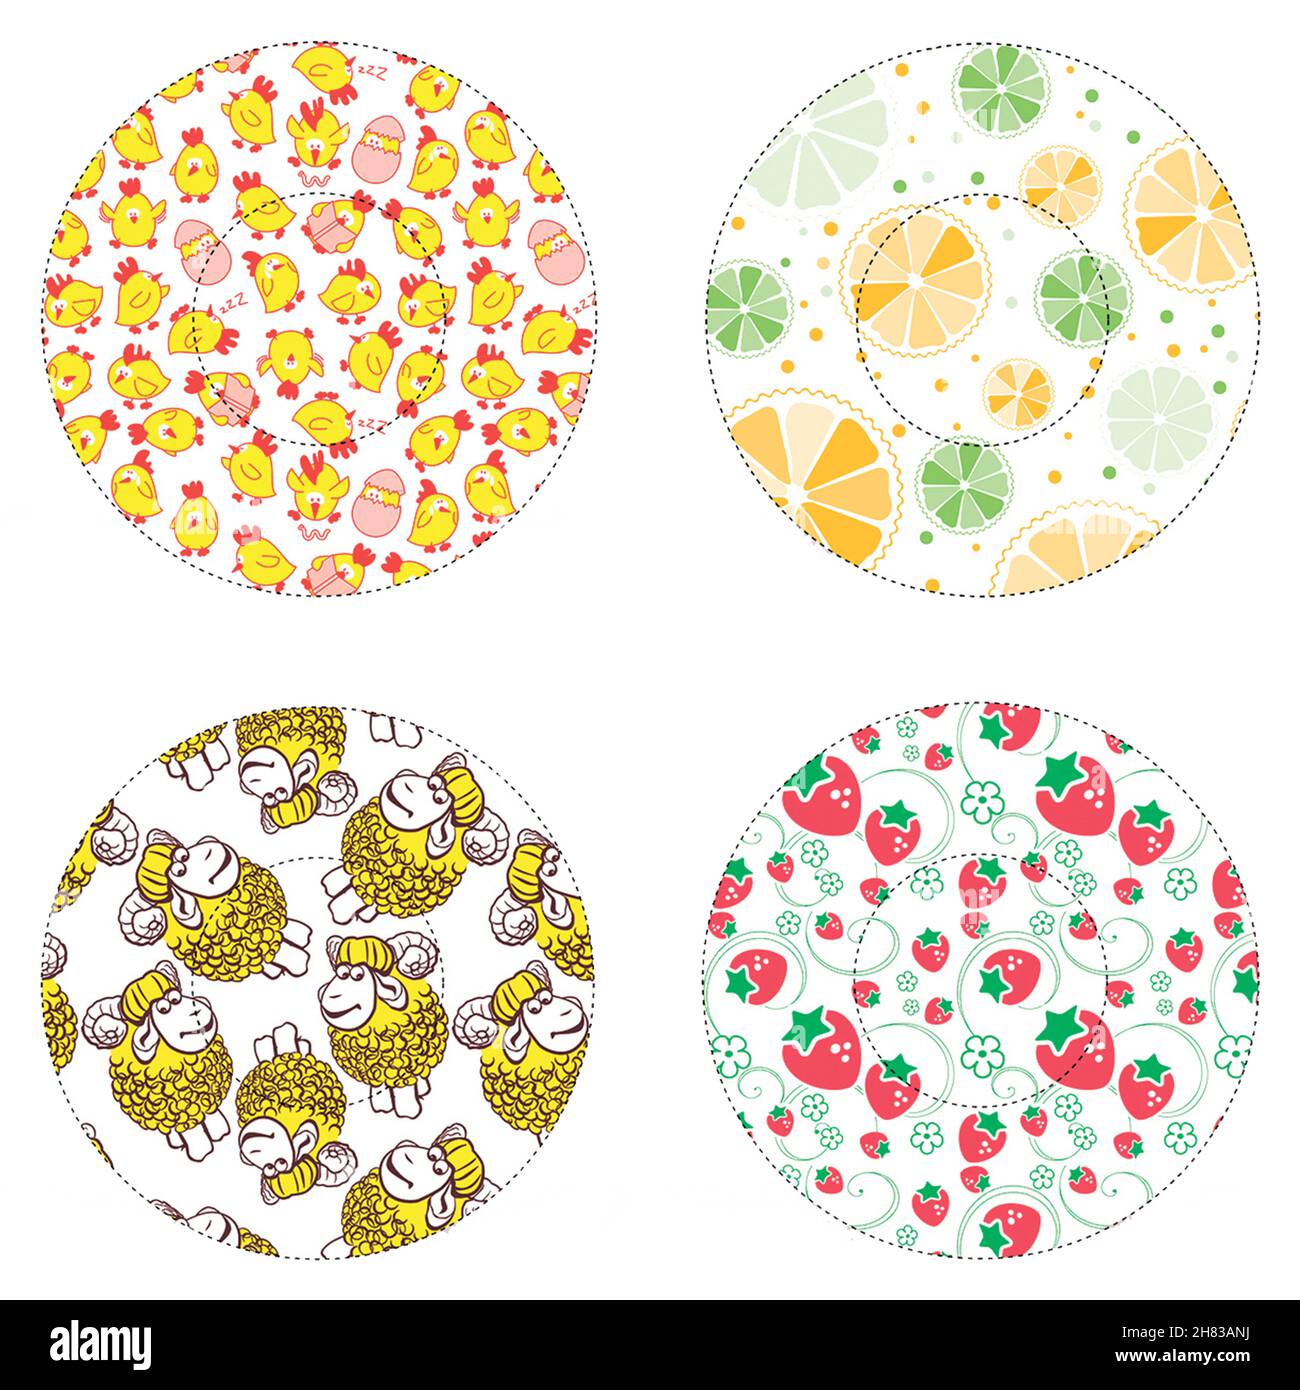 Plate icons set with colored patterns isolated over white background, illustration. Textured round icons collection, circle muffins or cupcakes form t Stock Photo